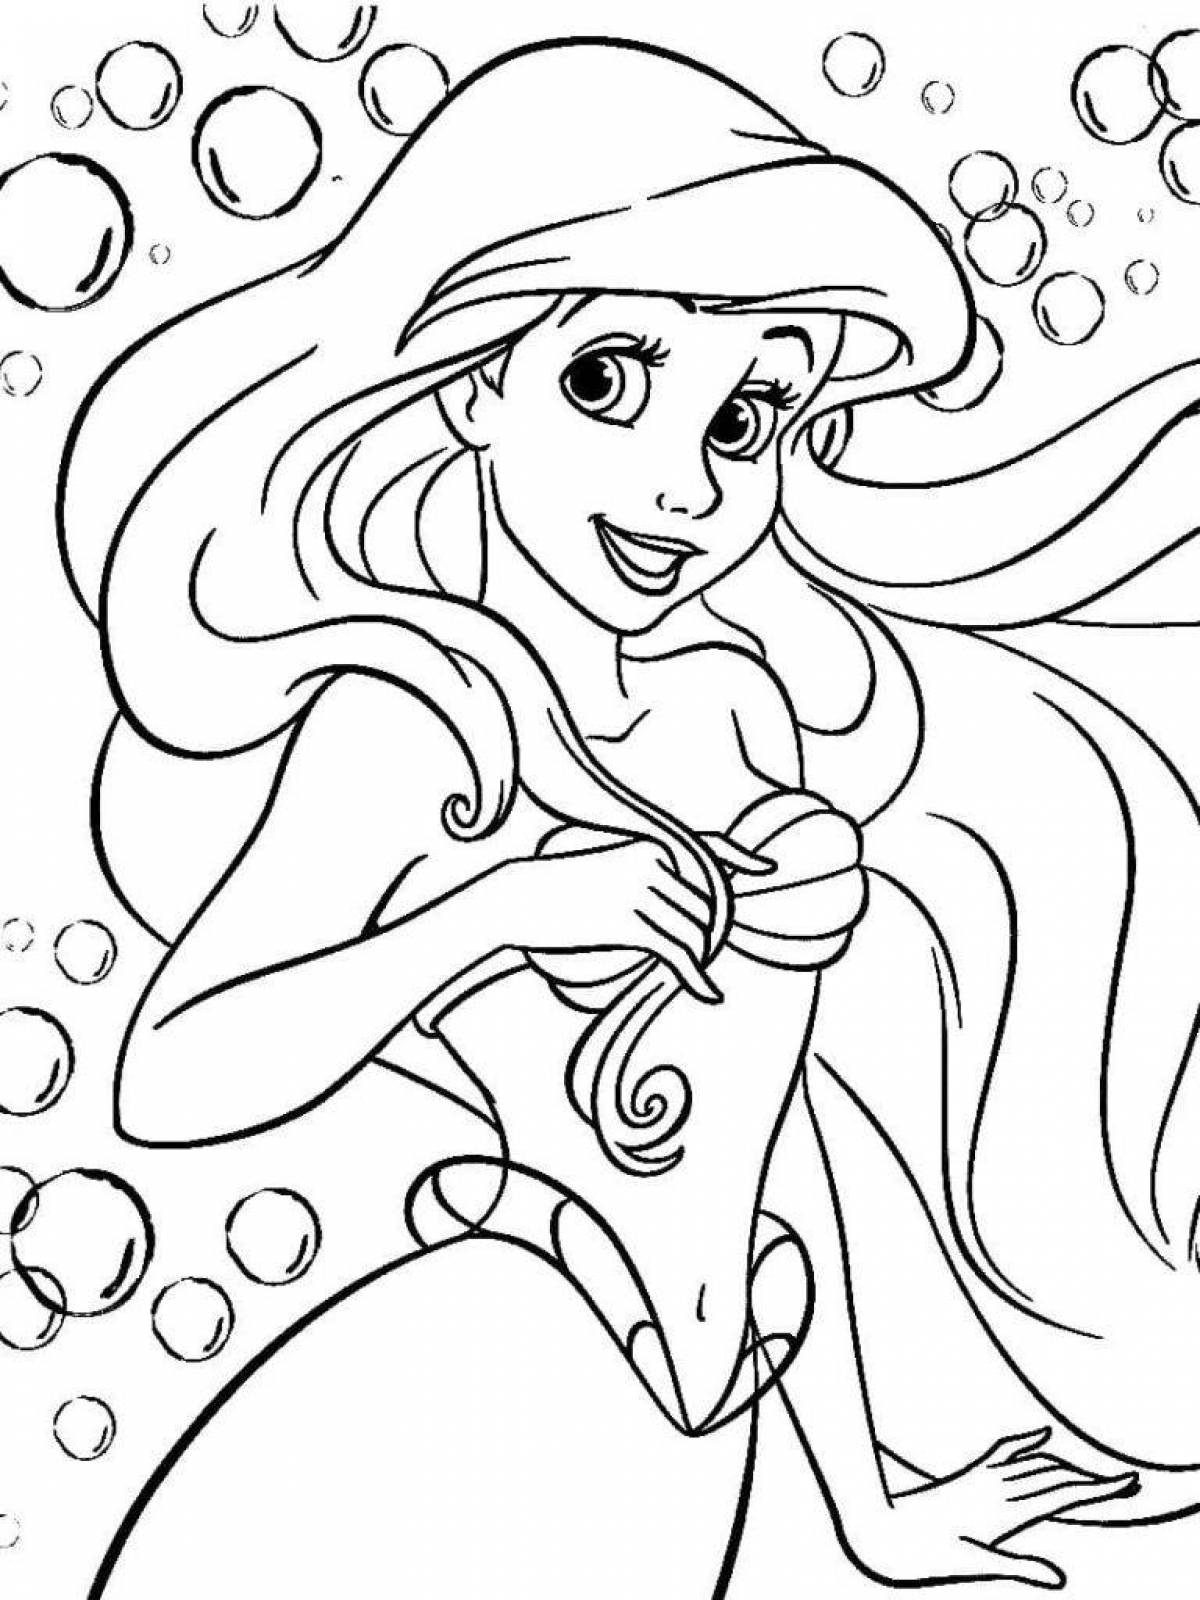 Gleeful coloring page melody